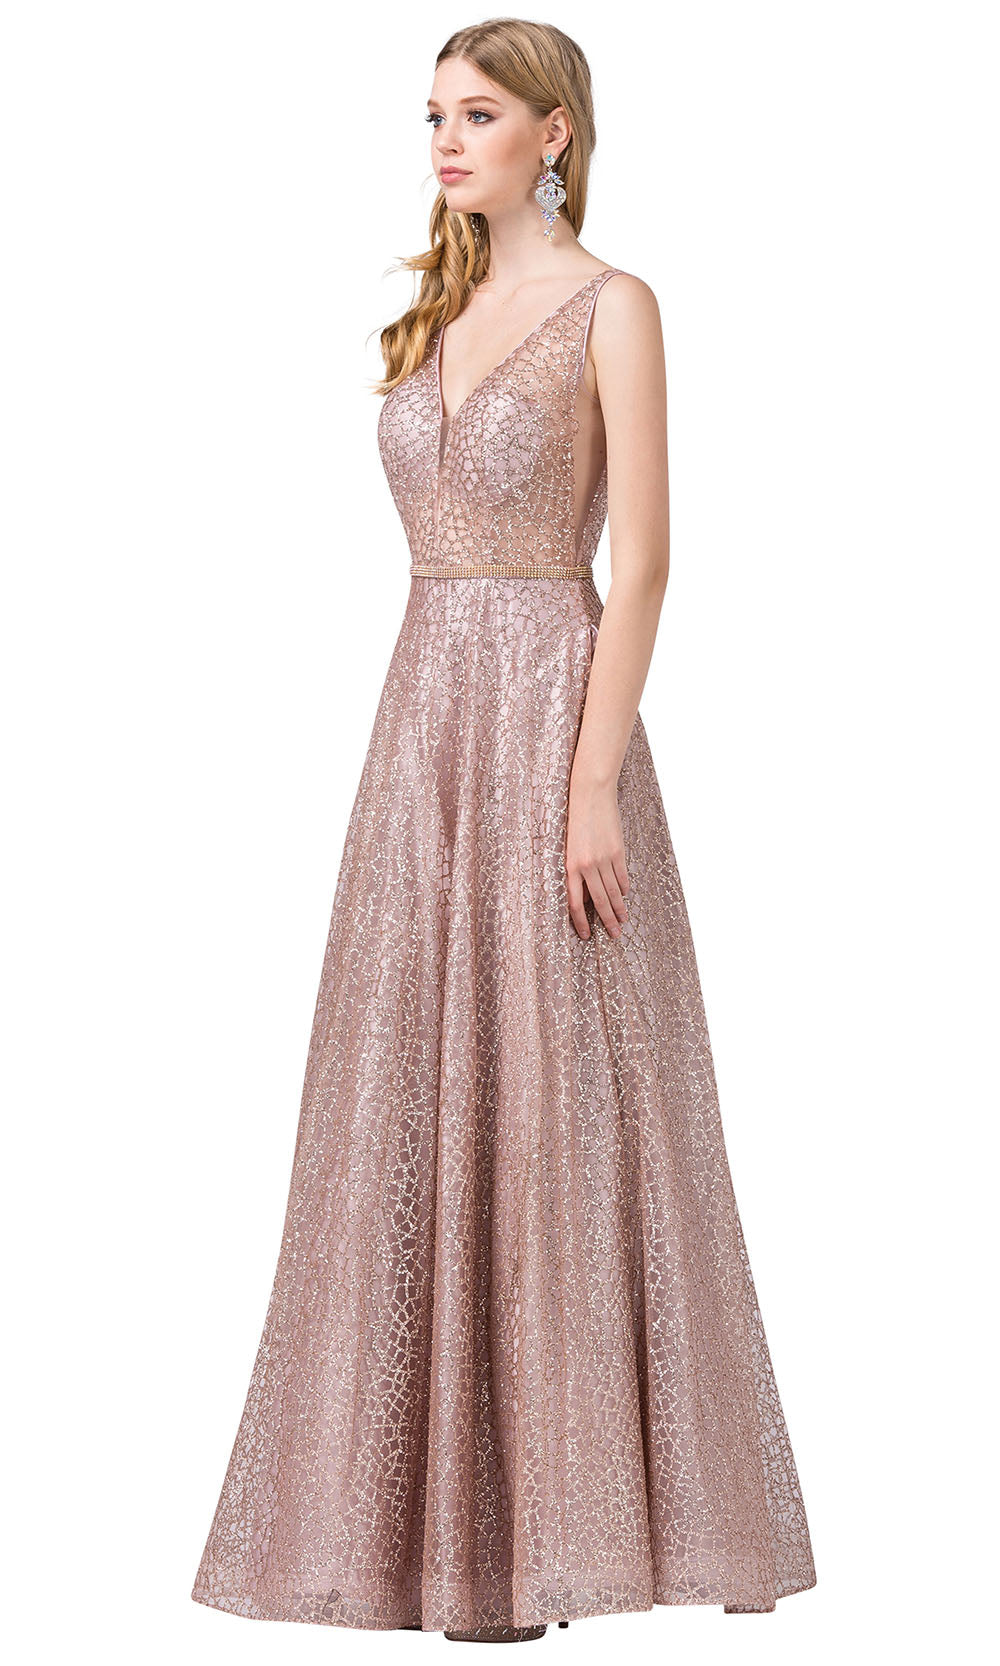 Dancing Queen - 2593 Illusion Bodice Glitter Mesh A-Line Gown In Pink